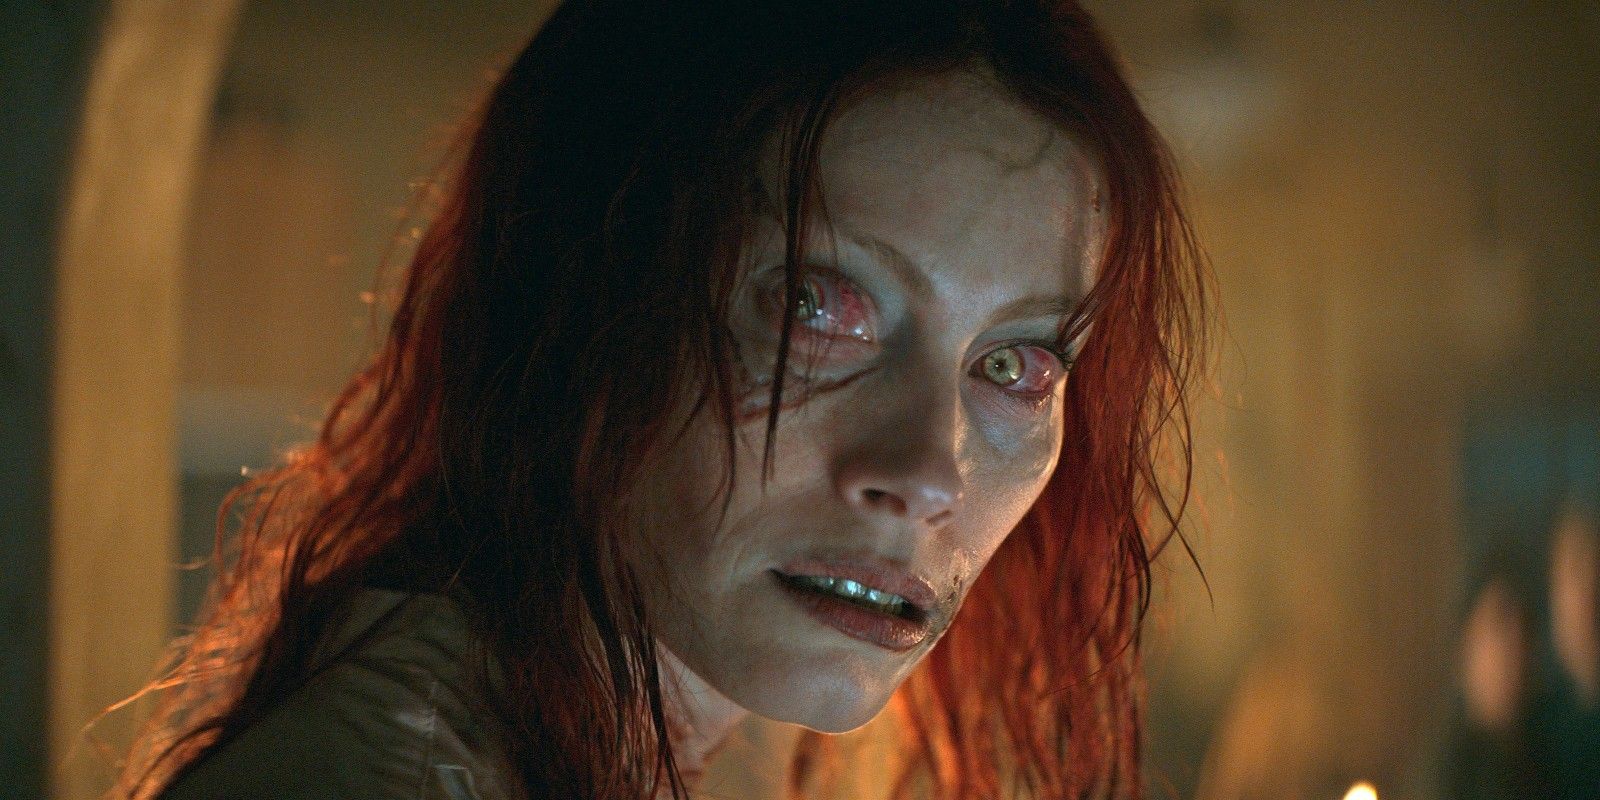 Second Evil Dead Spinoff Movie In The Works From Sam Raimi's Production CompanySecond Evil Dead Spinoff Movie In The Works From Sam Raimi's Production Company